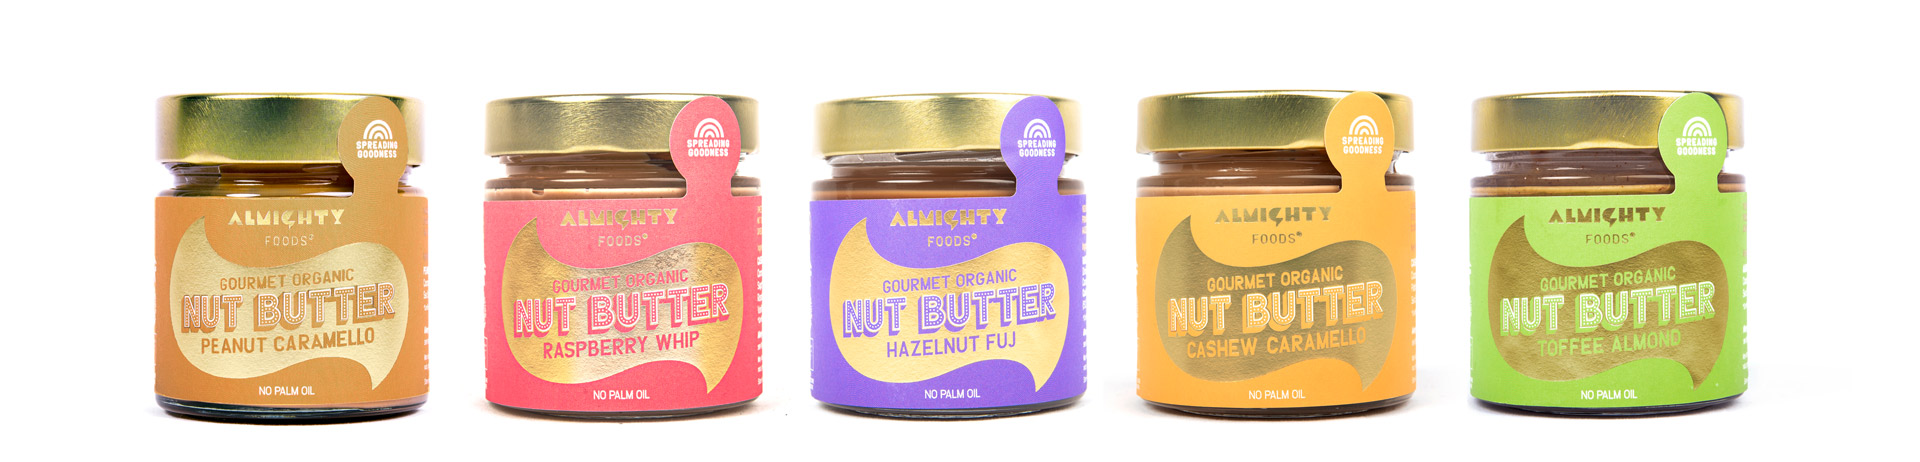 Range of 5 nut butters sitting on a white background.